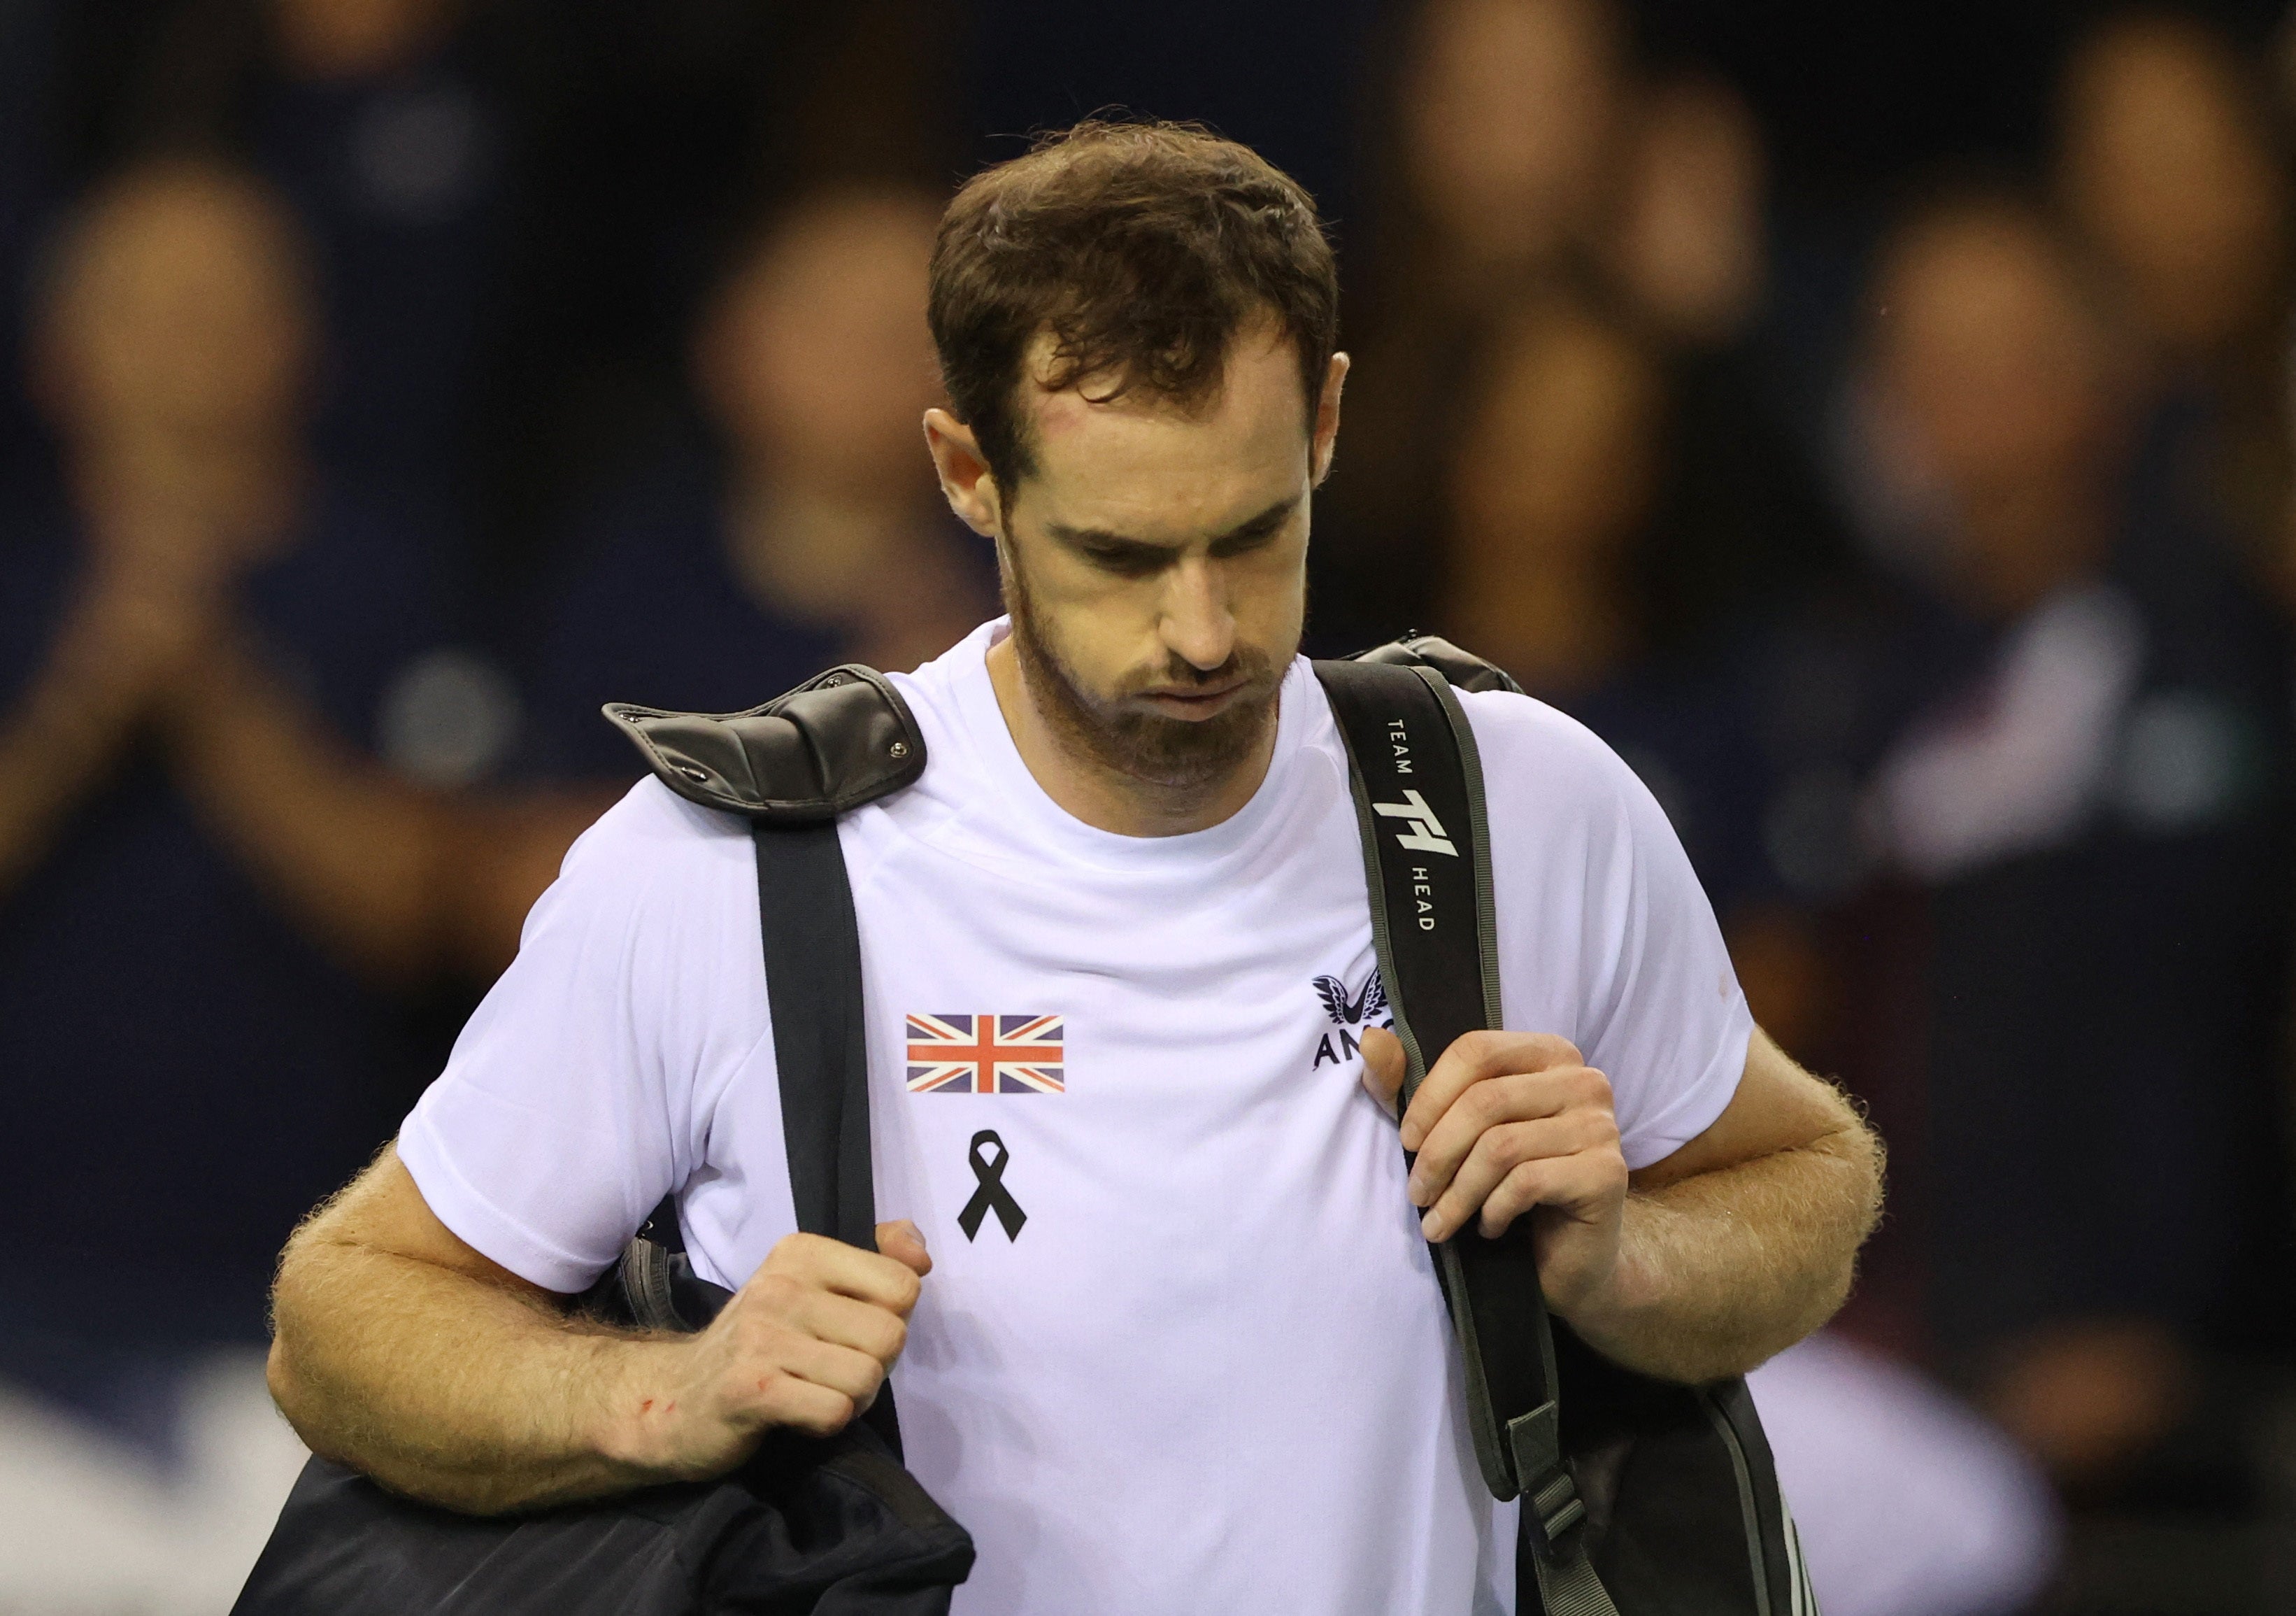 Britain’s Davis Cup clash with the USA on Wednesday did not finish until just before 1am